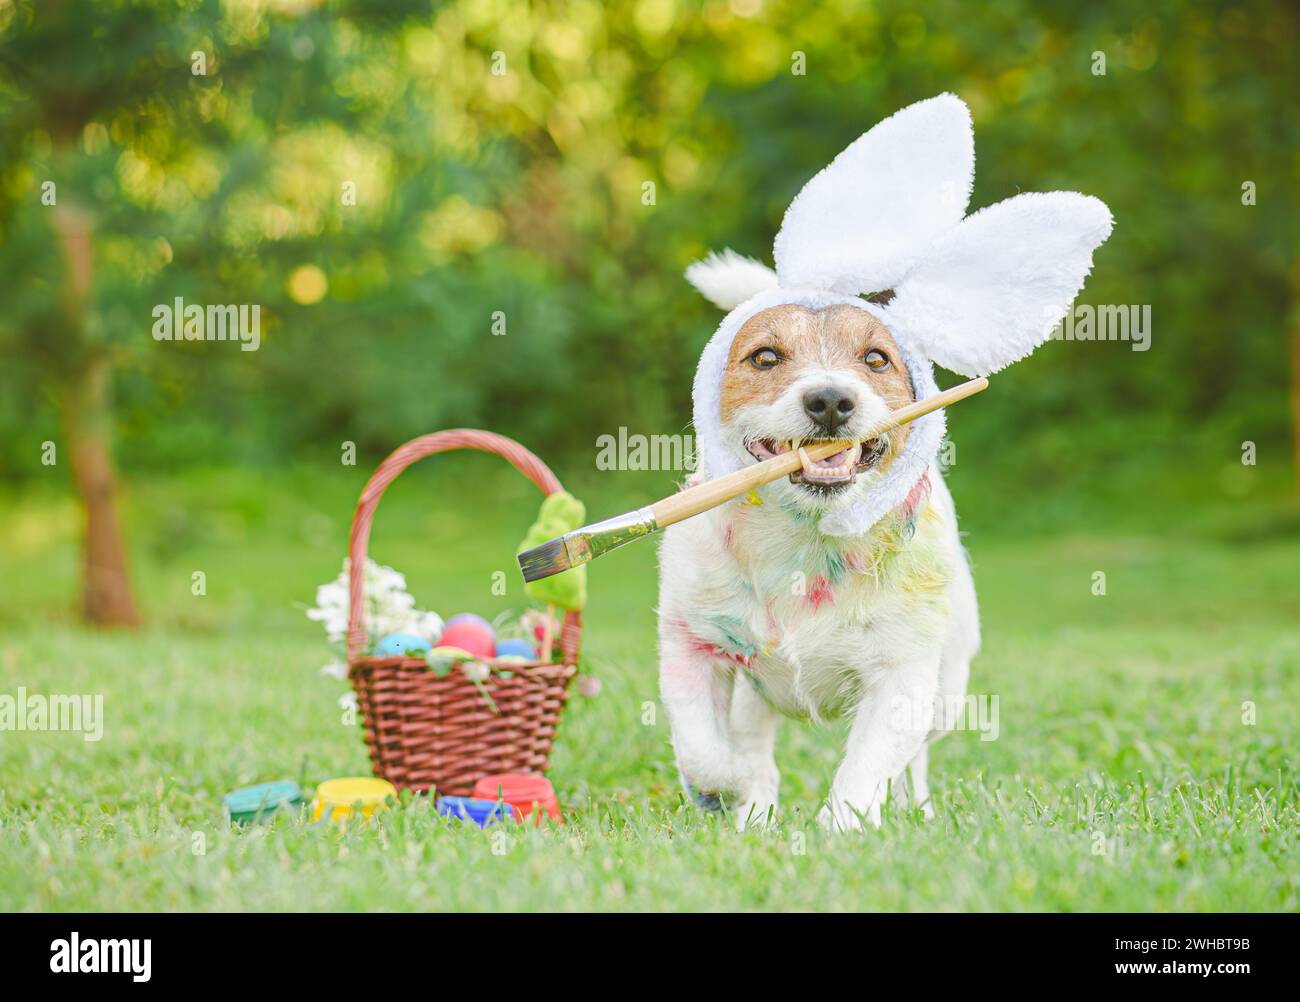 Funny looking dog with bunny ears holding paintbrush dyes eggs for Easter egg hunt in garden Stock Photo